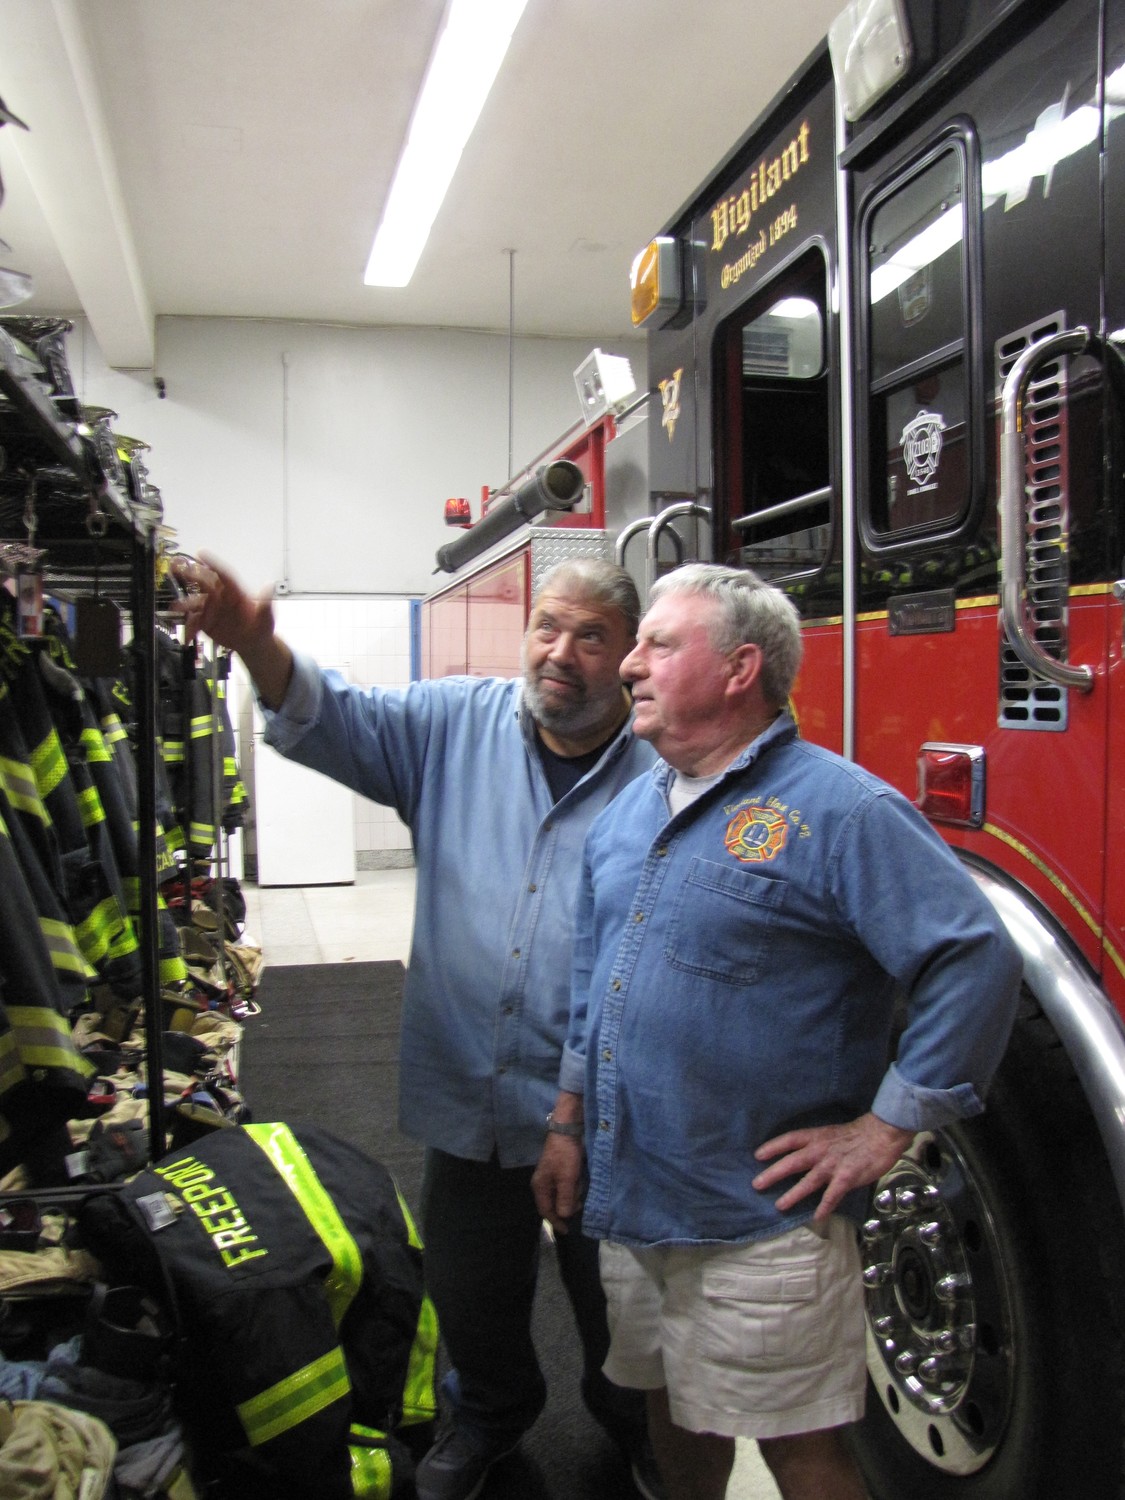 Though retired from their careers, Freeport firefighters Anthony Basile, left, and Edward Martin continue to volunteer with the department as mentors and supporters of younger firefighters.